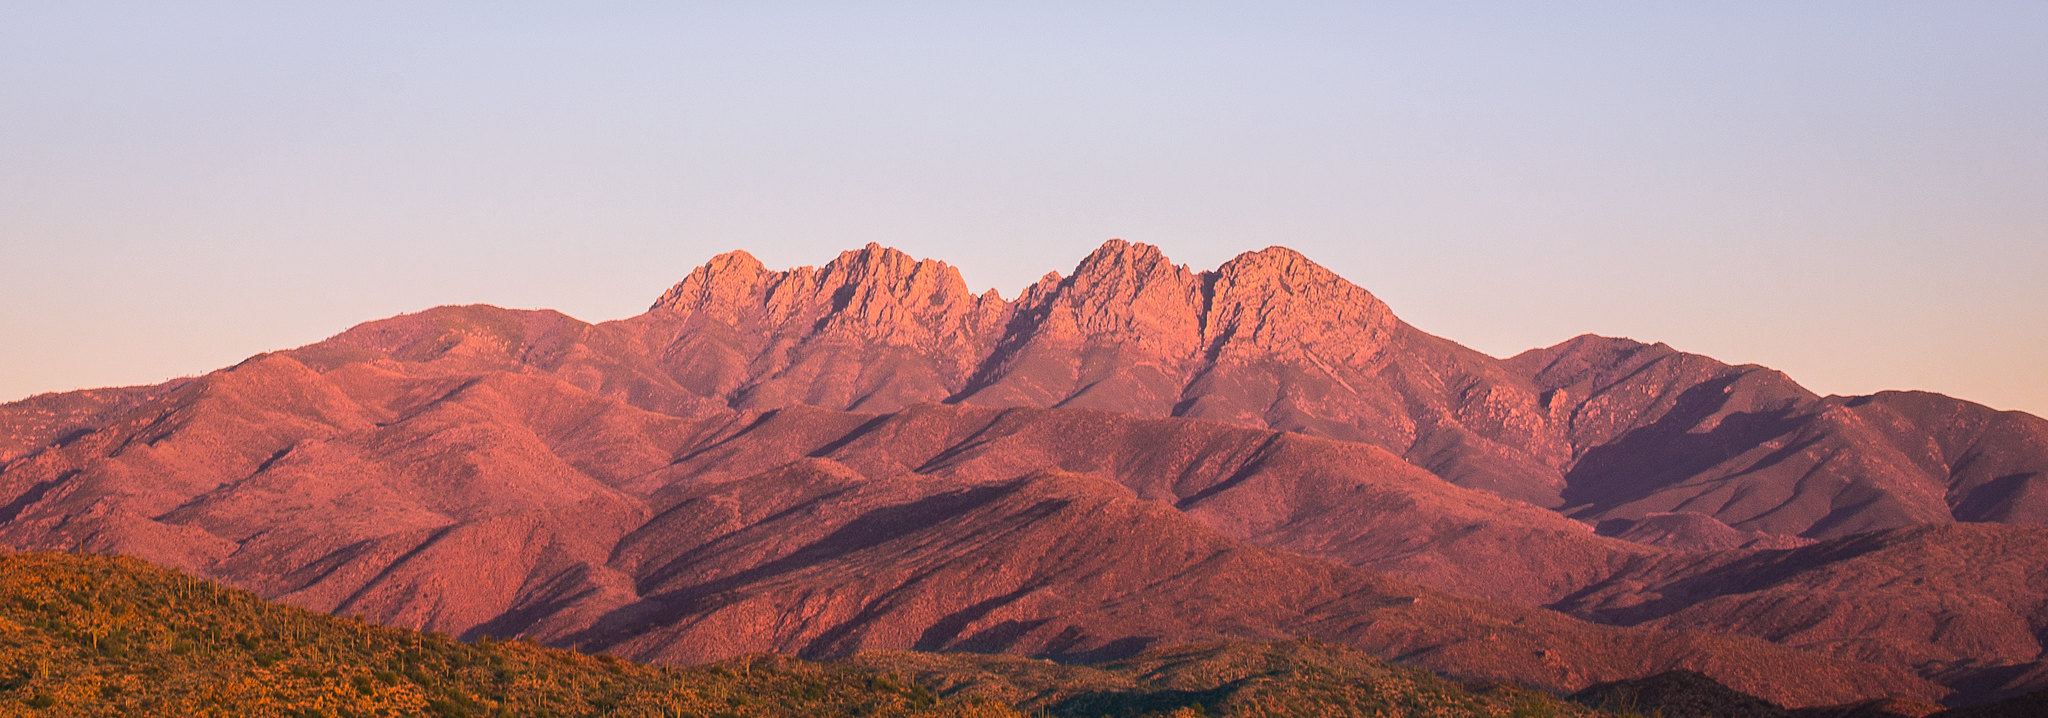 Landscape shot of Four Peaks in the Tonto National Forest.